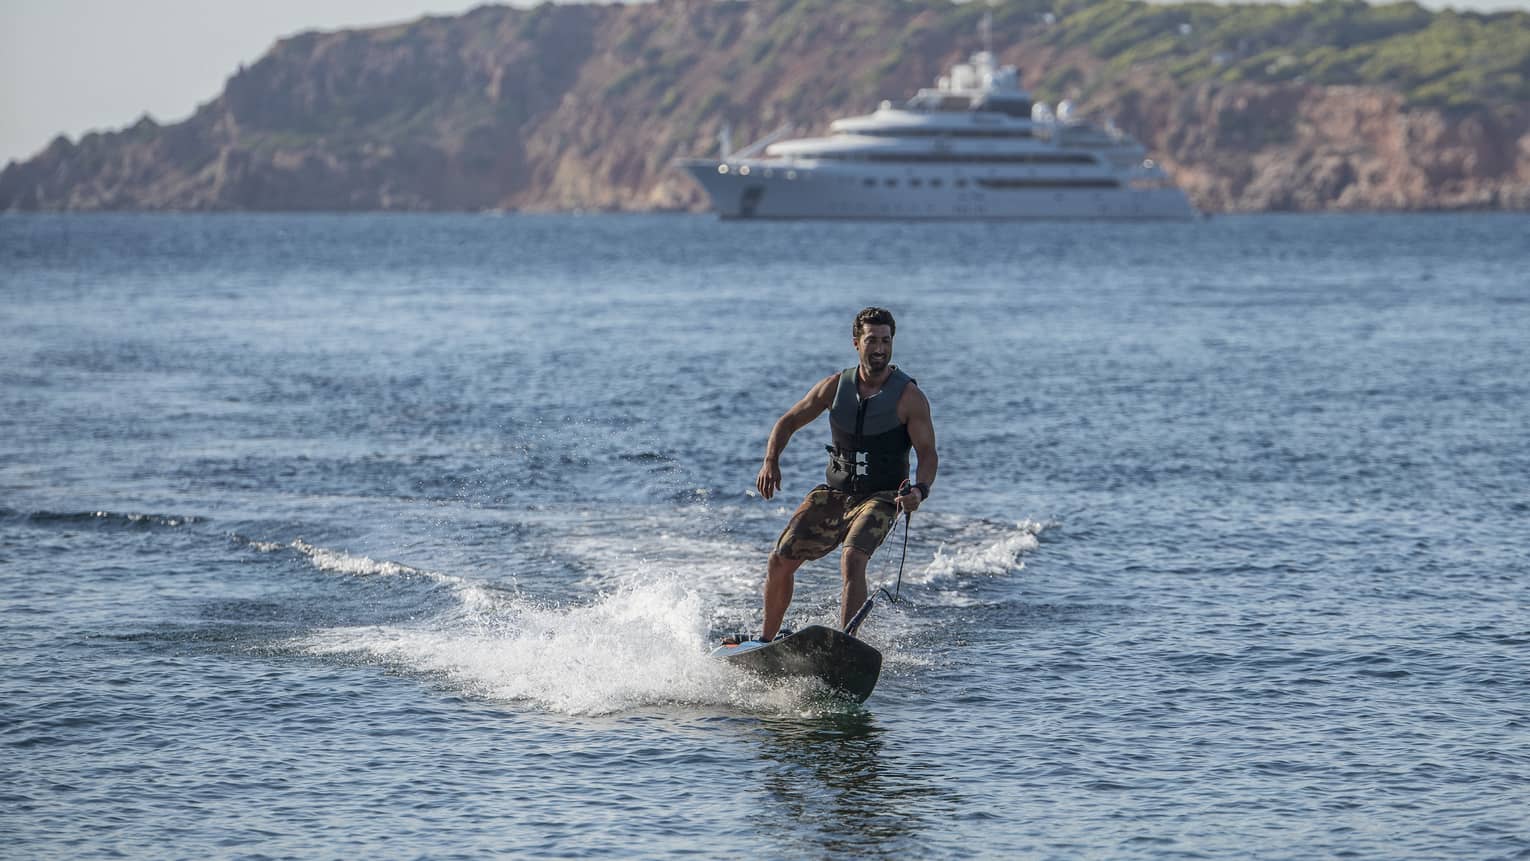 Front view of a guest jetting along the sea on a motorized surfboard, a majestic ship and forested mountains in the backdrop.